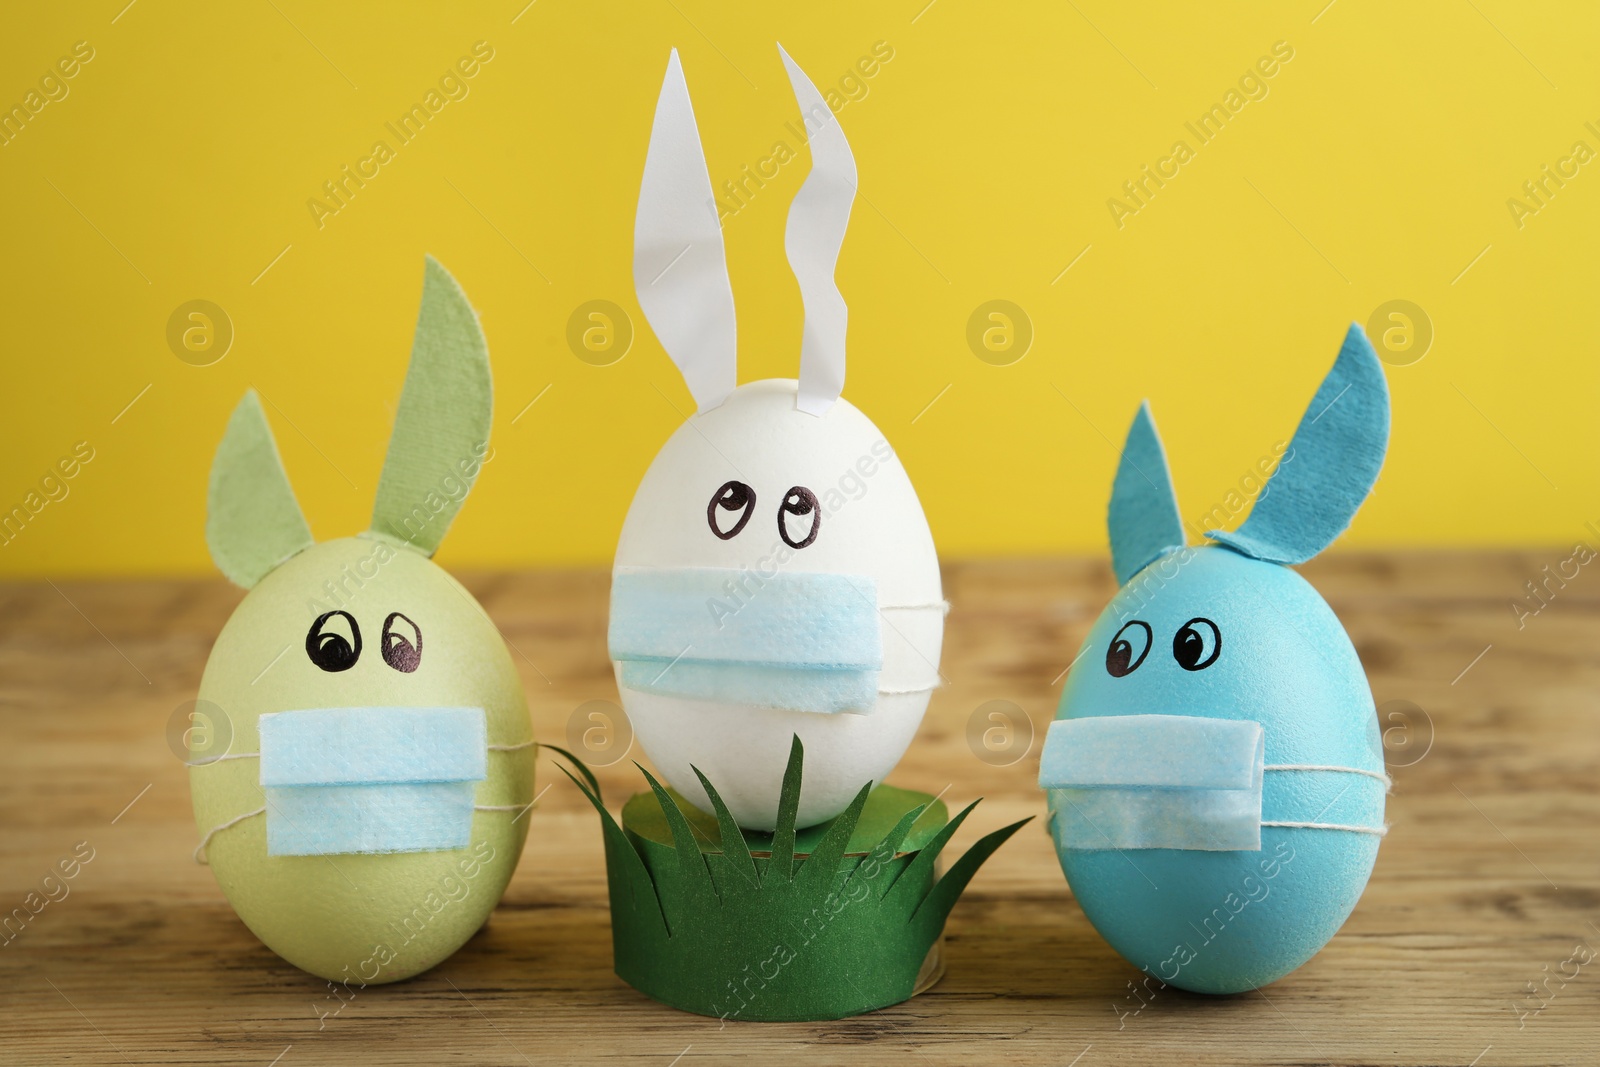 Photo of Dyed eggs with bunny ears in protective masks on wooden table against yellow background. Easter holiday during COVID-19 quarantine